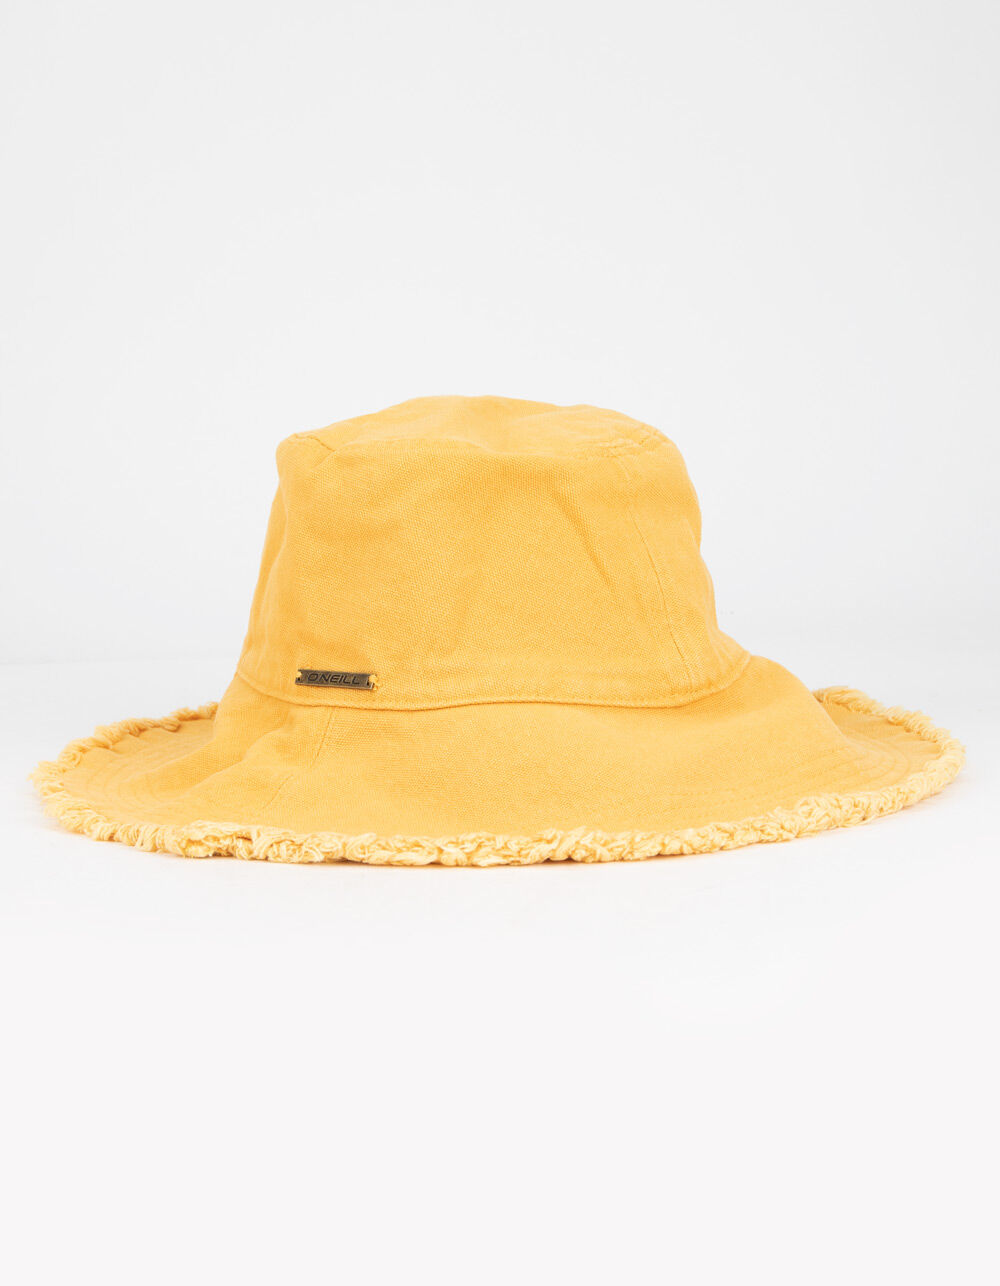 O'NEILL Shades Away Womens Yellow Bucket Hat image number 0